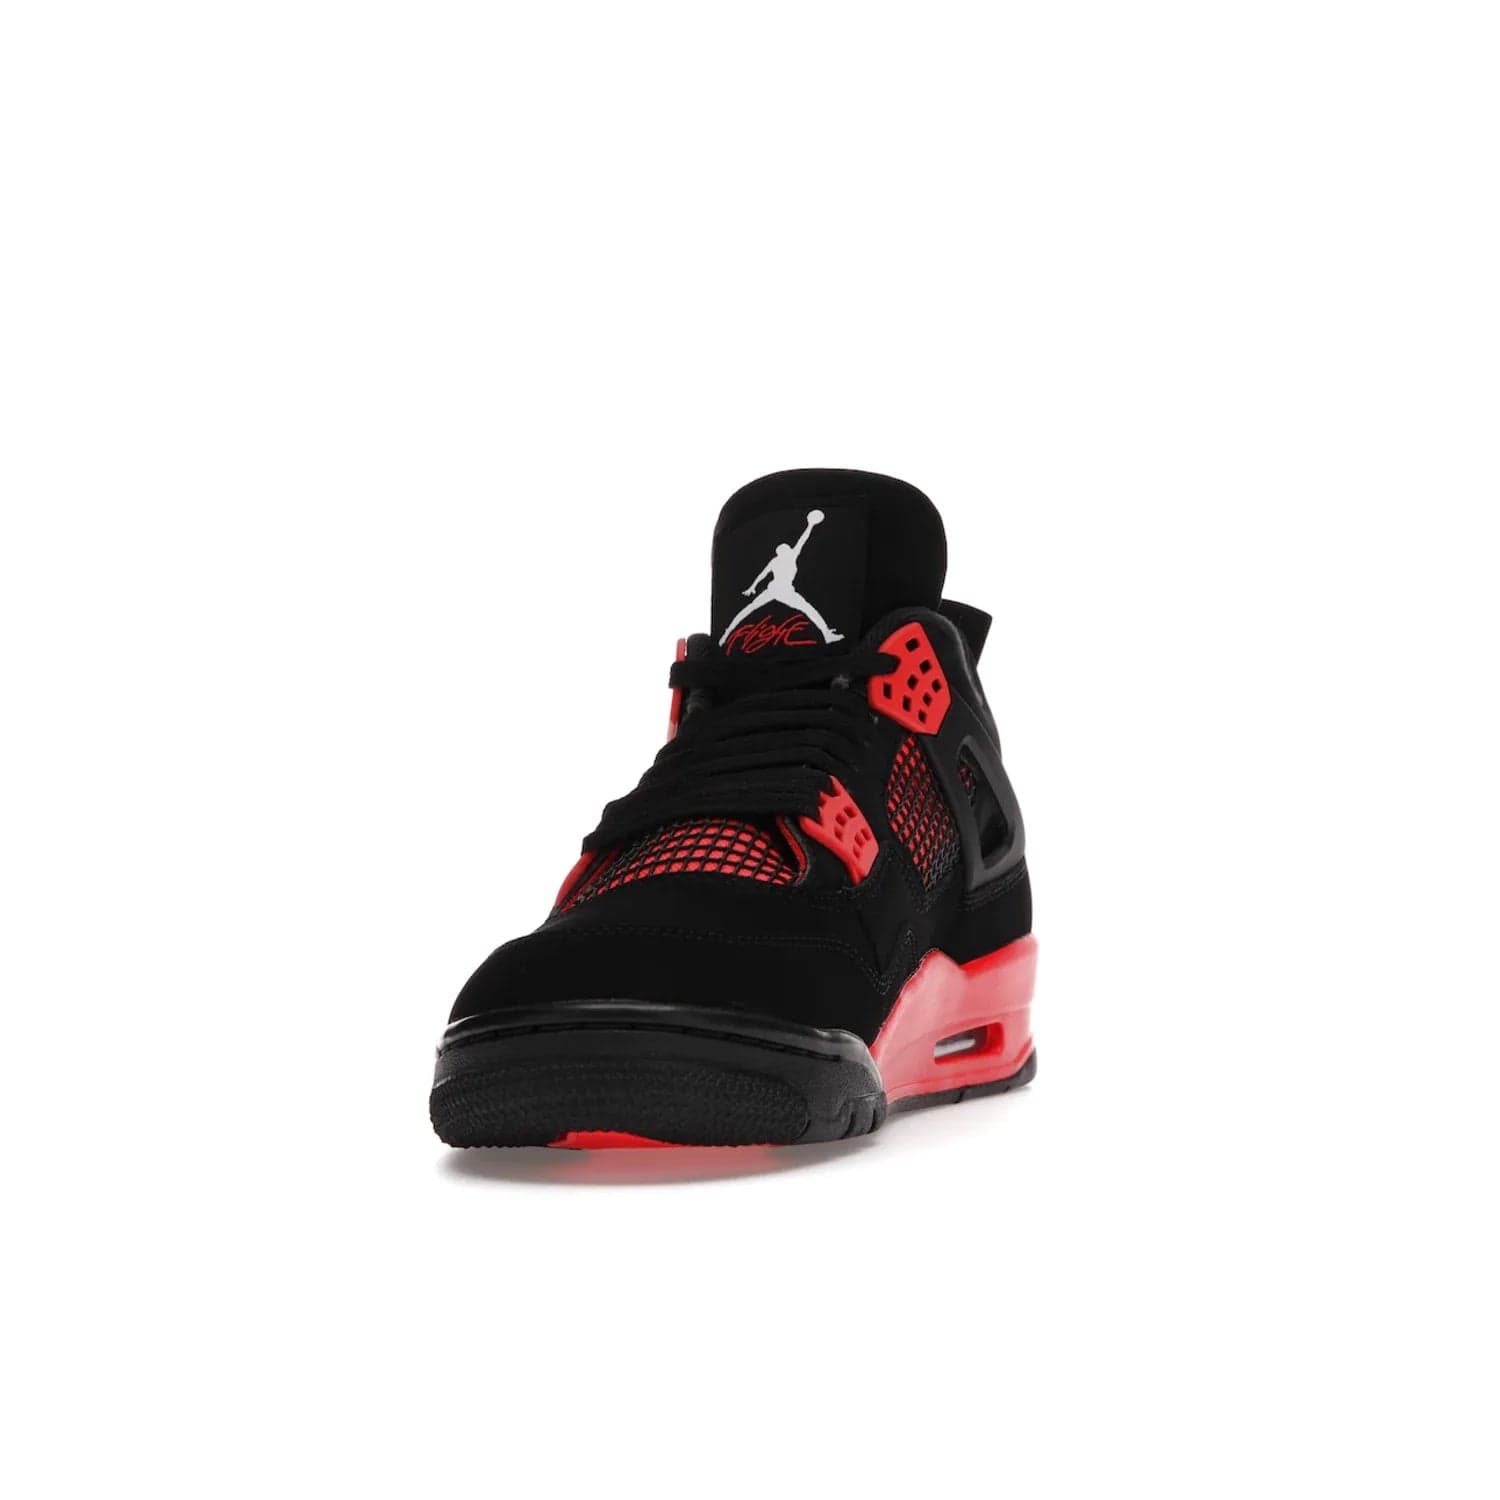 Jordan 4 Retro Red Thunder - Image 12 - Only at www.BallersClubKickz.com - Upscale your footwear with the Air Jordan 4 Retro Red Thunder. Featuring a Durabuck upper, red underlays, signature Flight patch, and vibrant red midsole, this retro sneaker adds style and edge. Releases in January 2022.